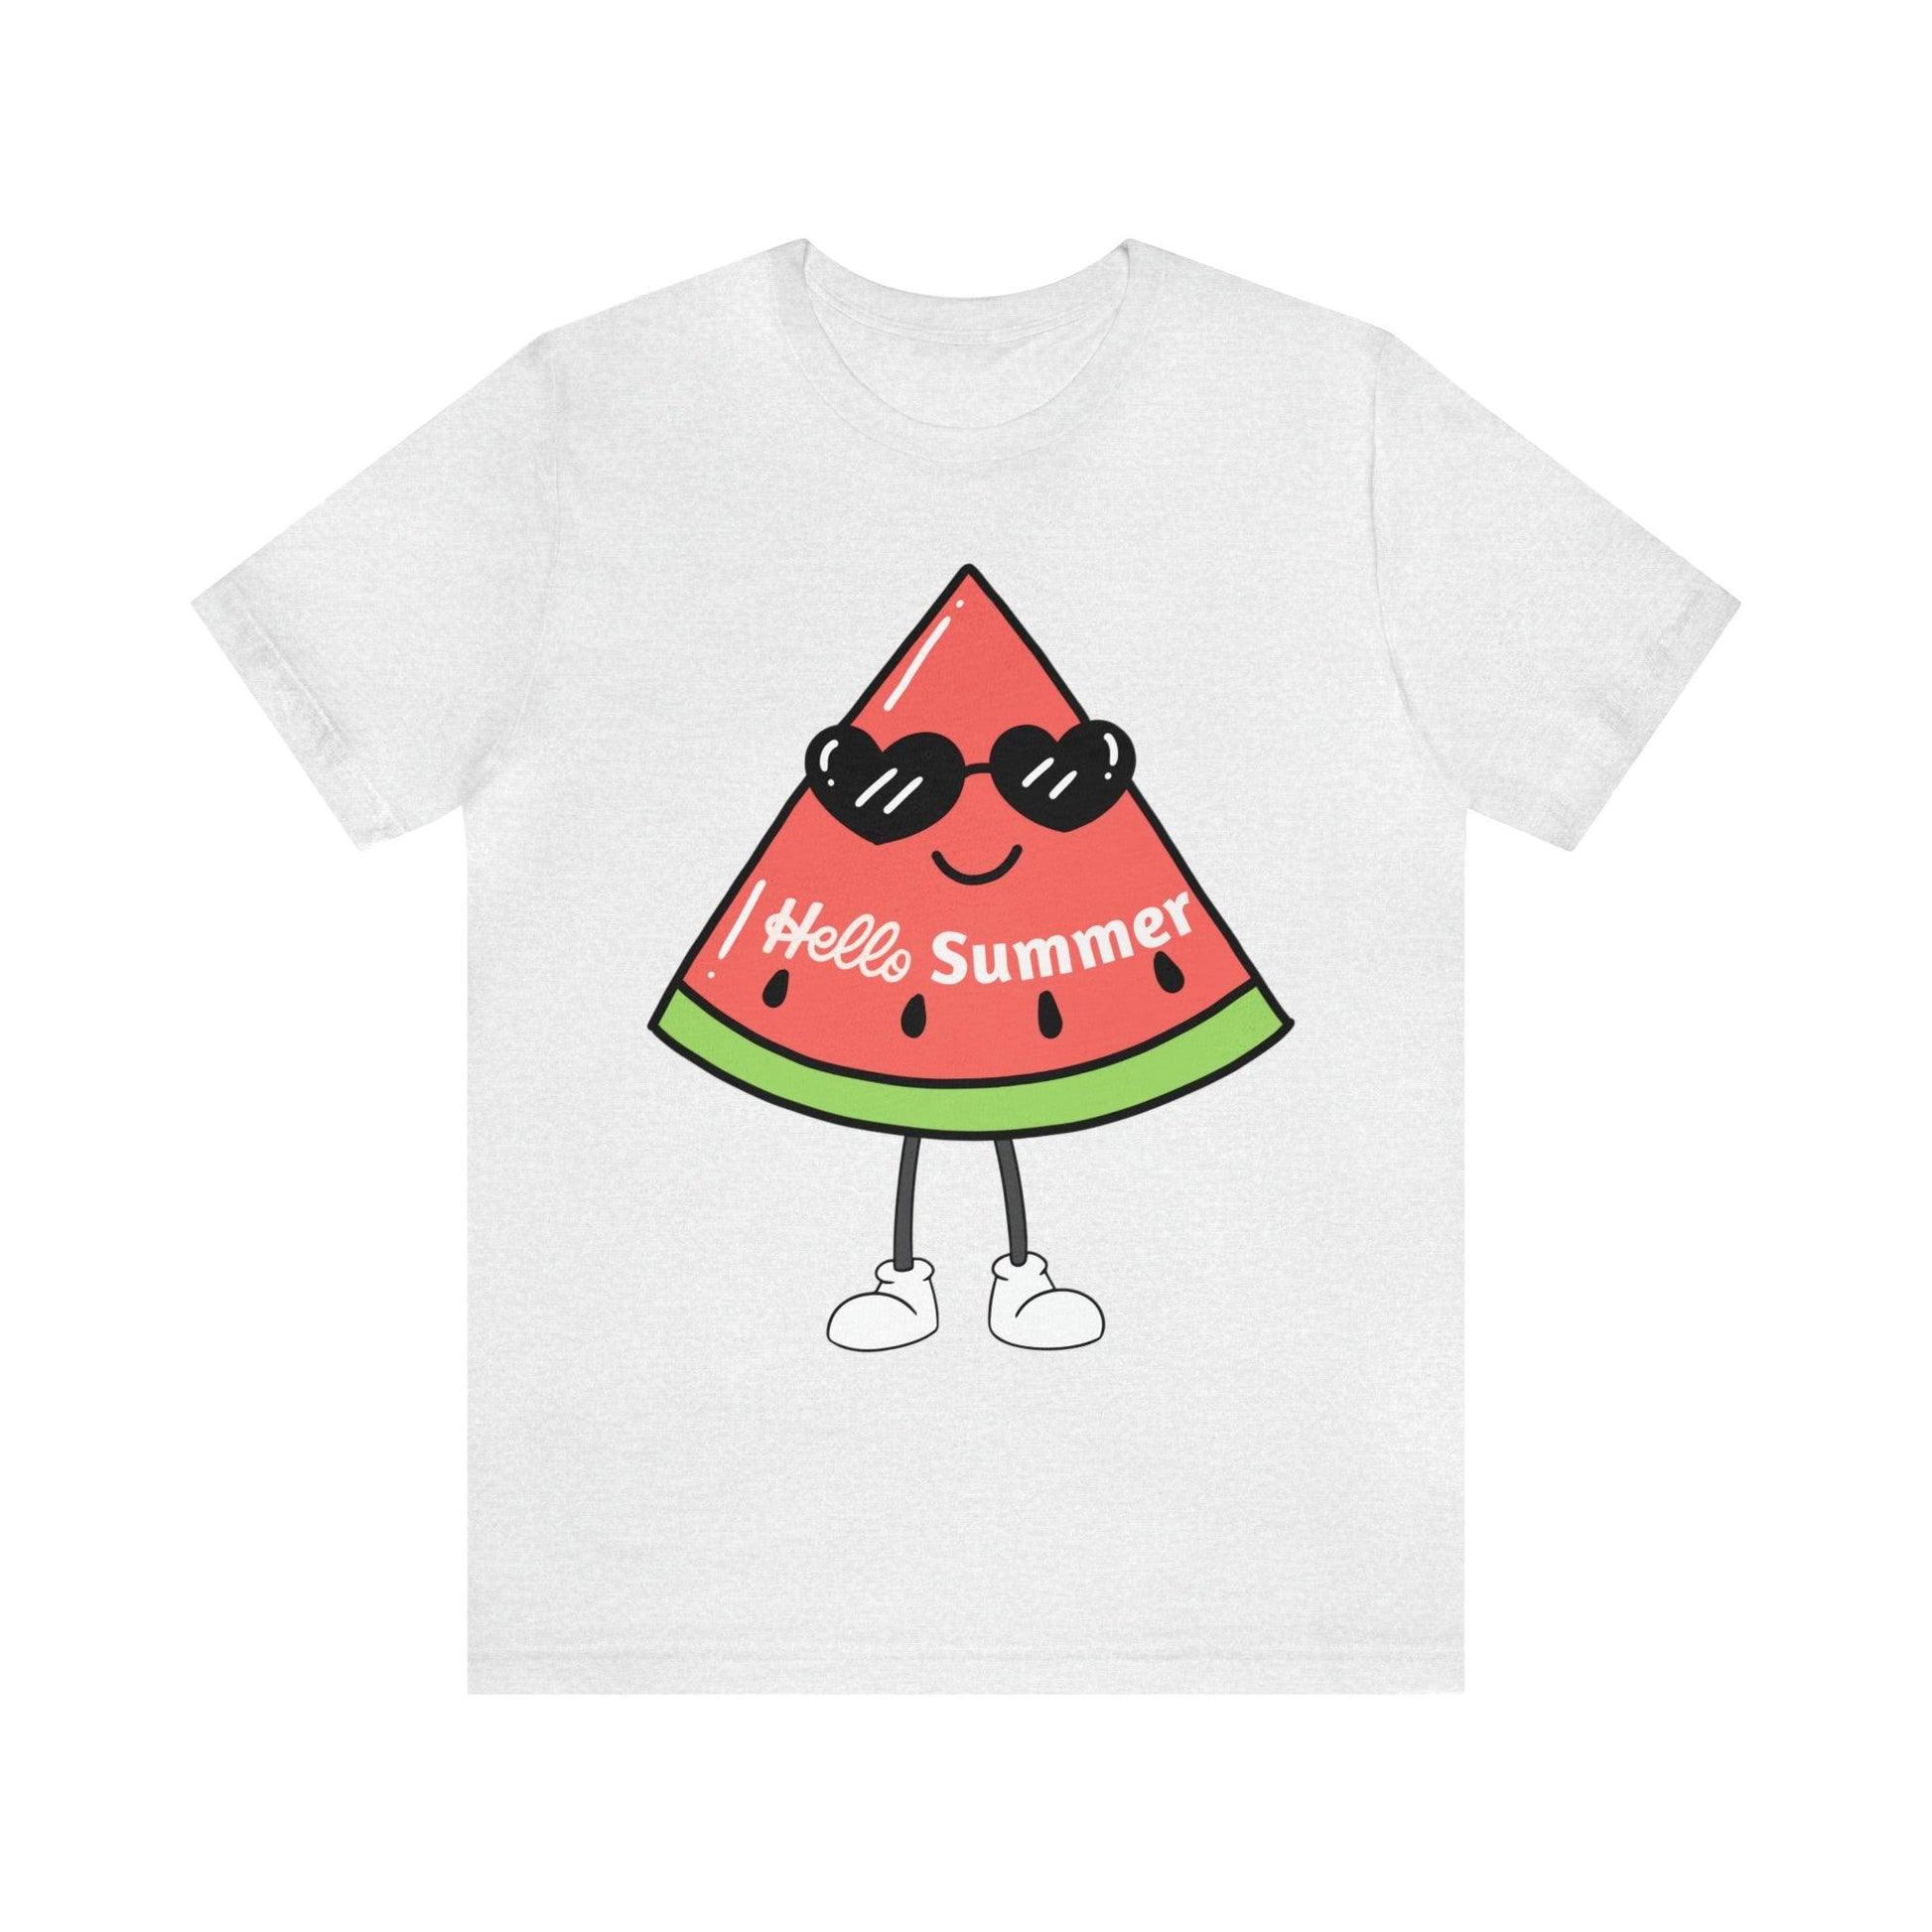 Funny Hello Summer Shirt, Summer shirts for women and men, Summer Casual Top Tee - Giftsmojo